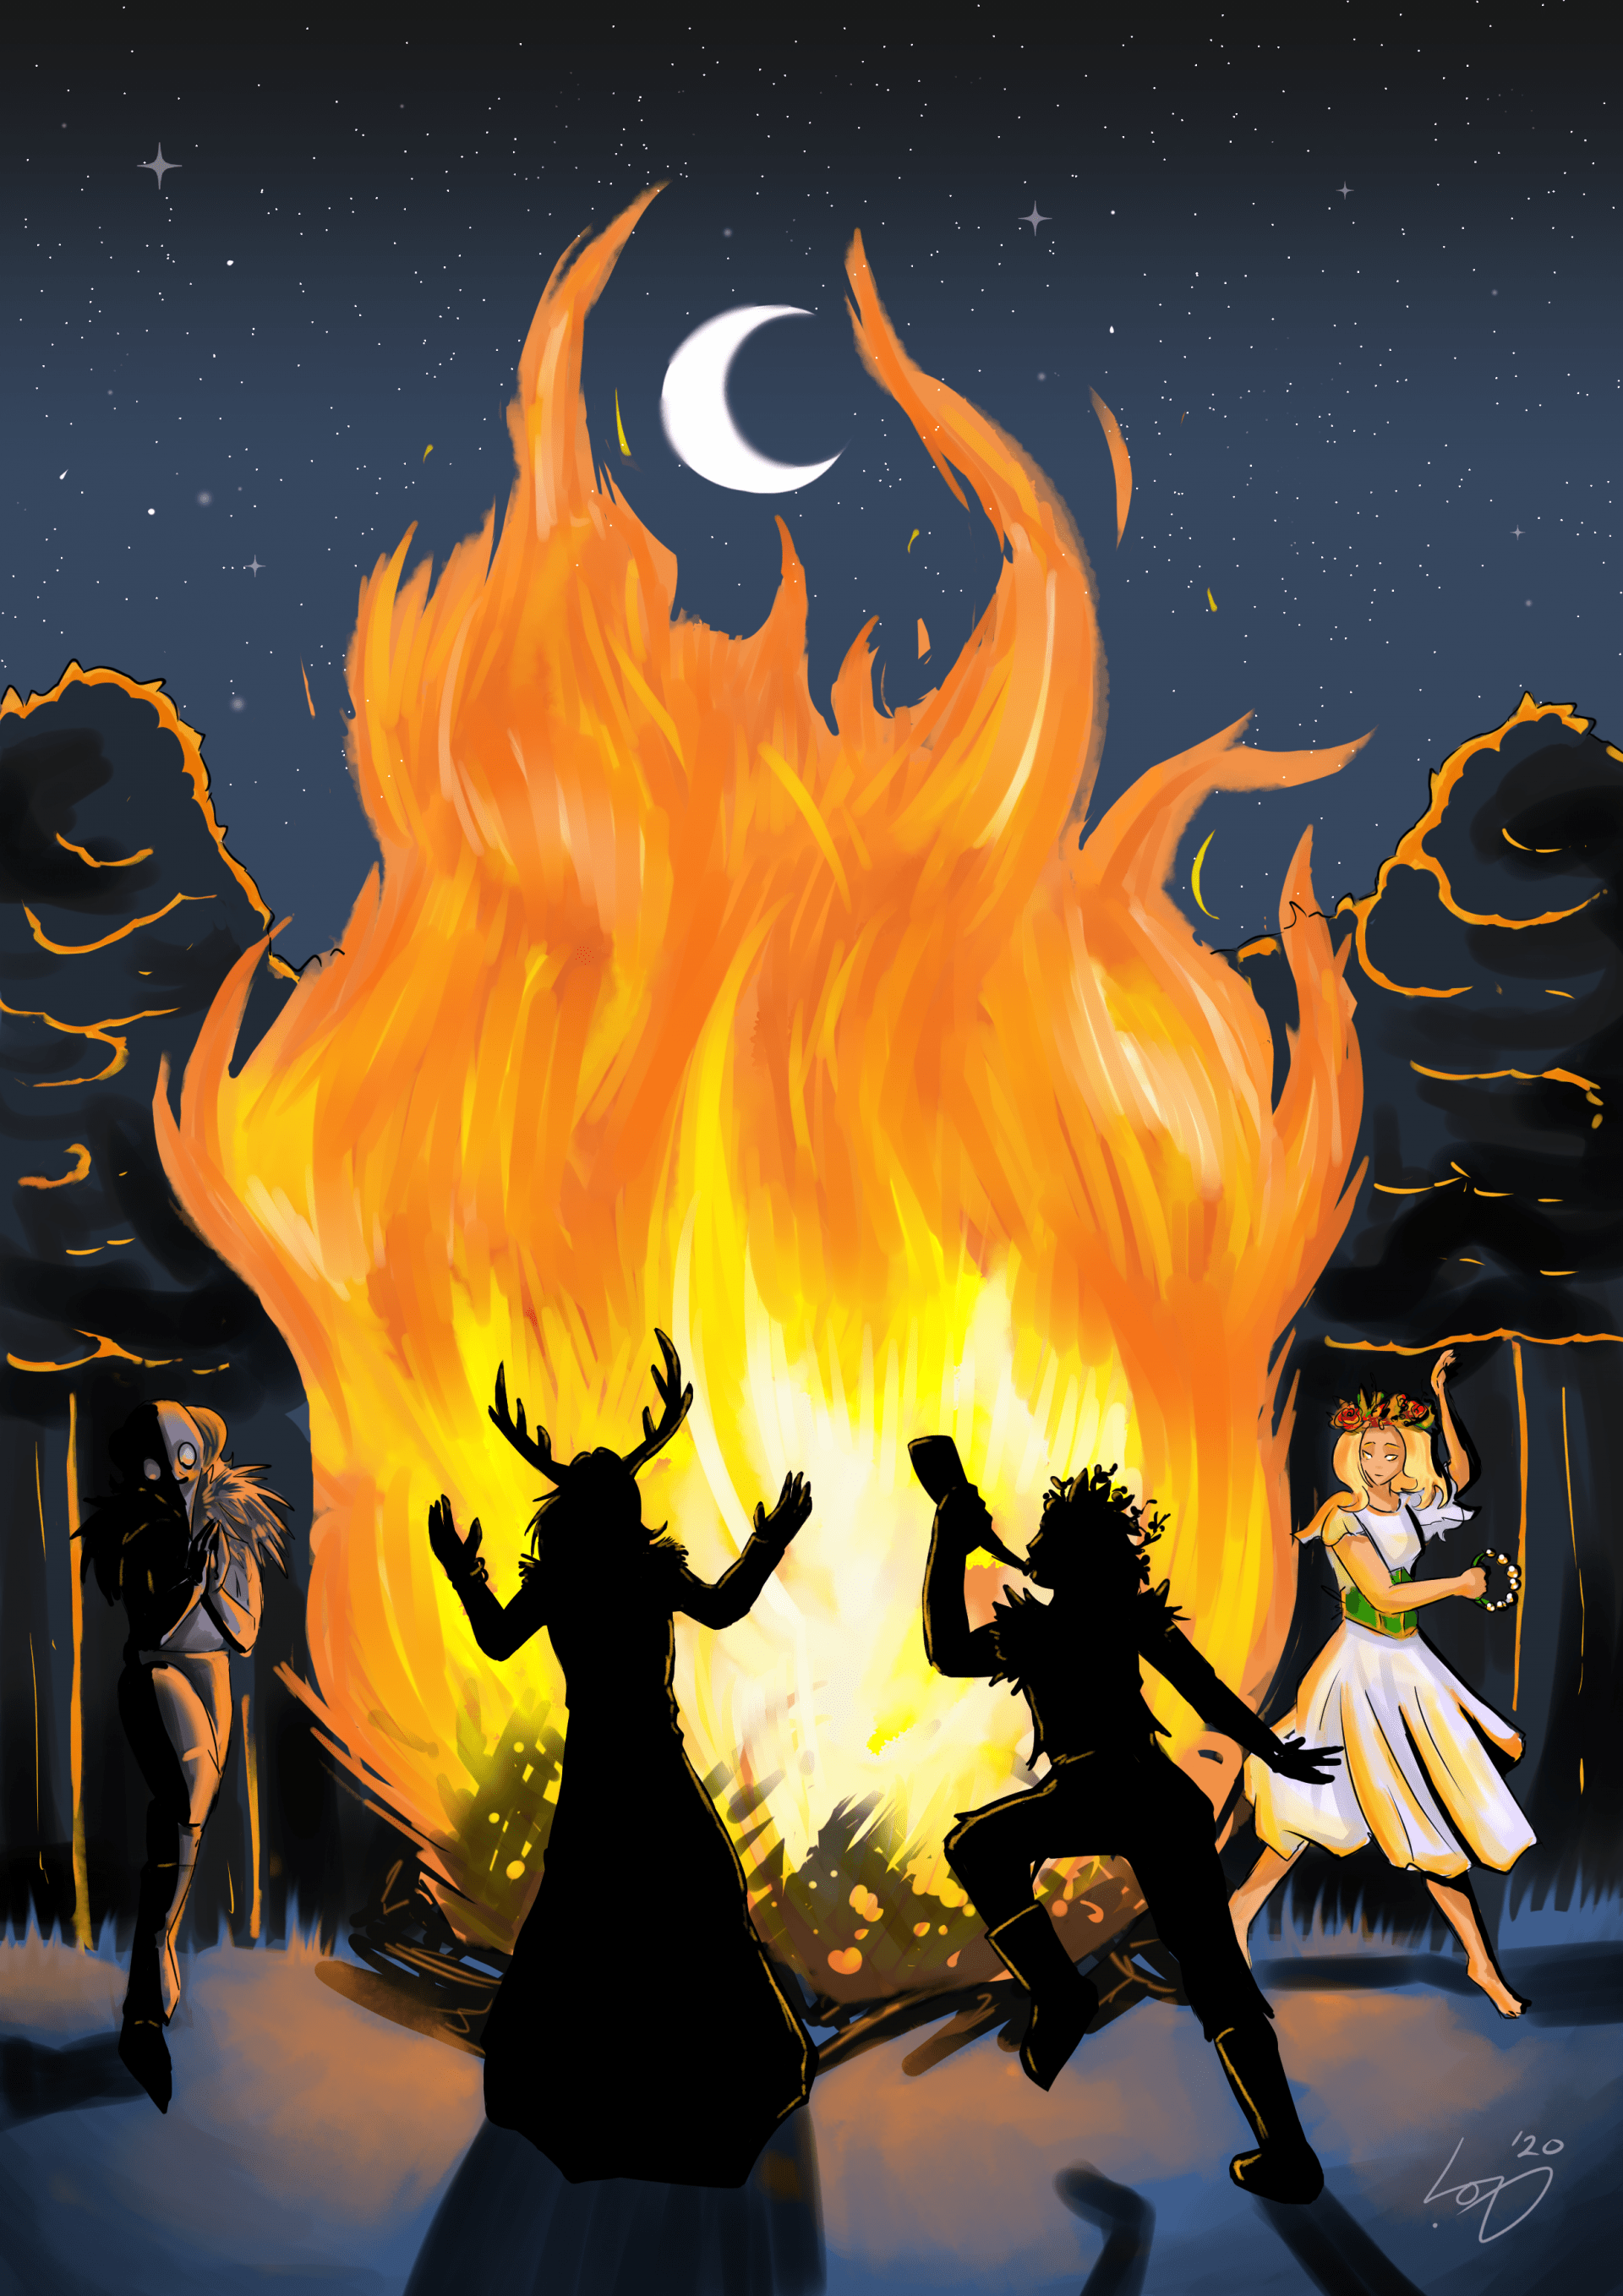 Illustration of ghostly figures dancing around a fire.